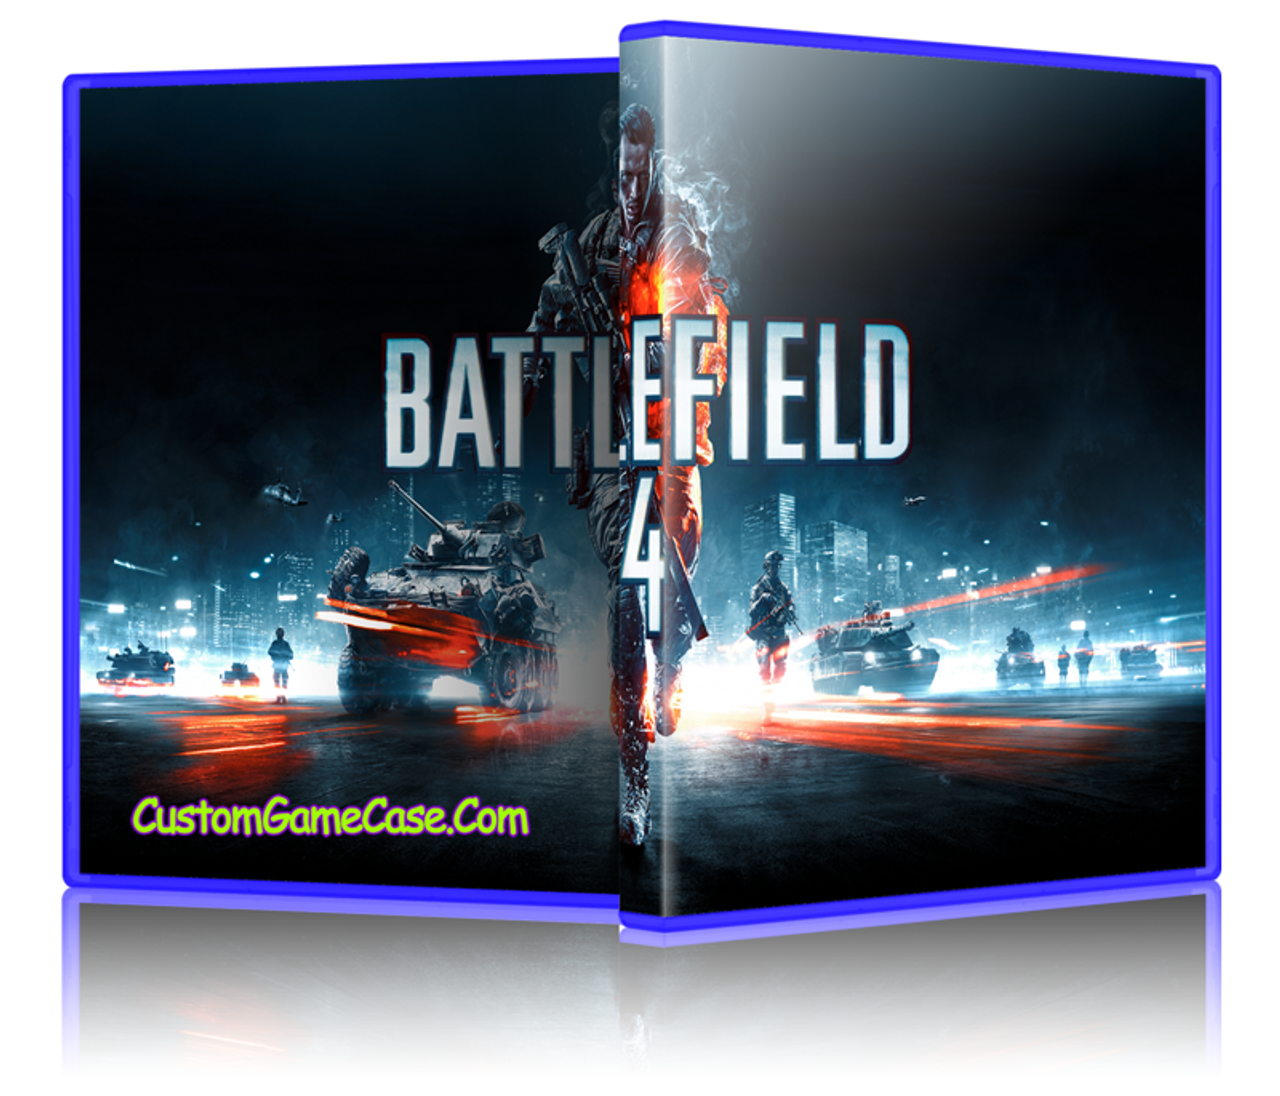 Ps4 - Battlefield 4 Sony PlayStation 4 W/ Case #111 – vandalsgaming